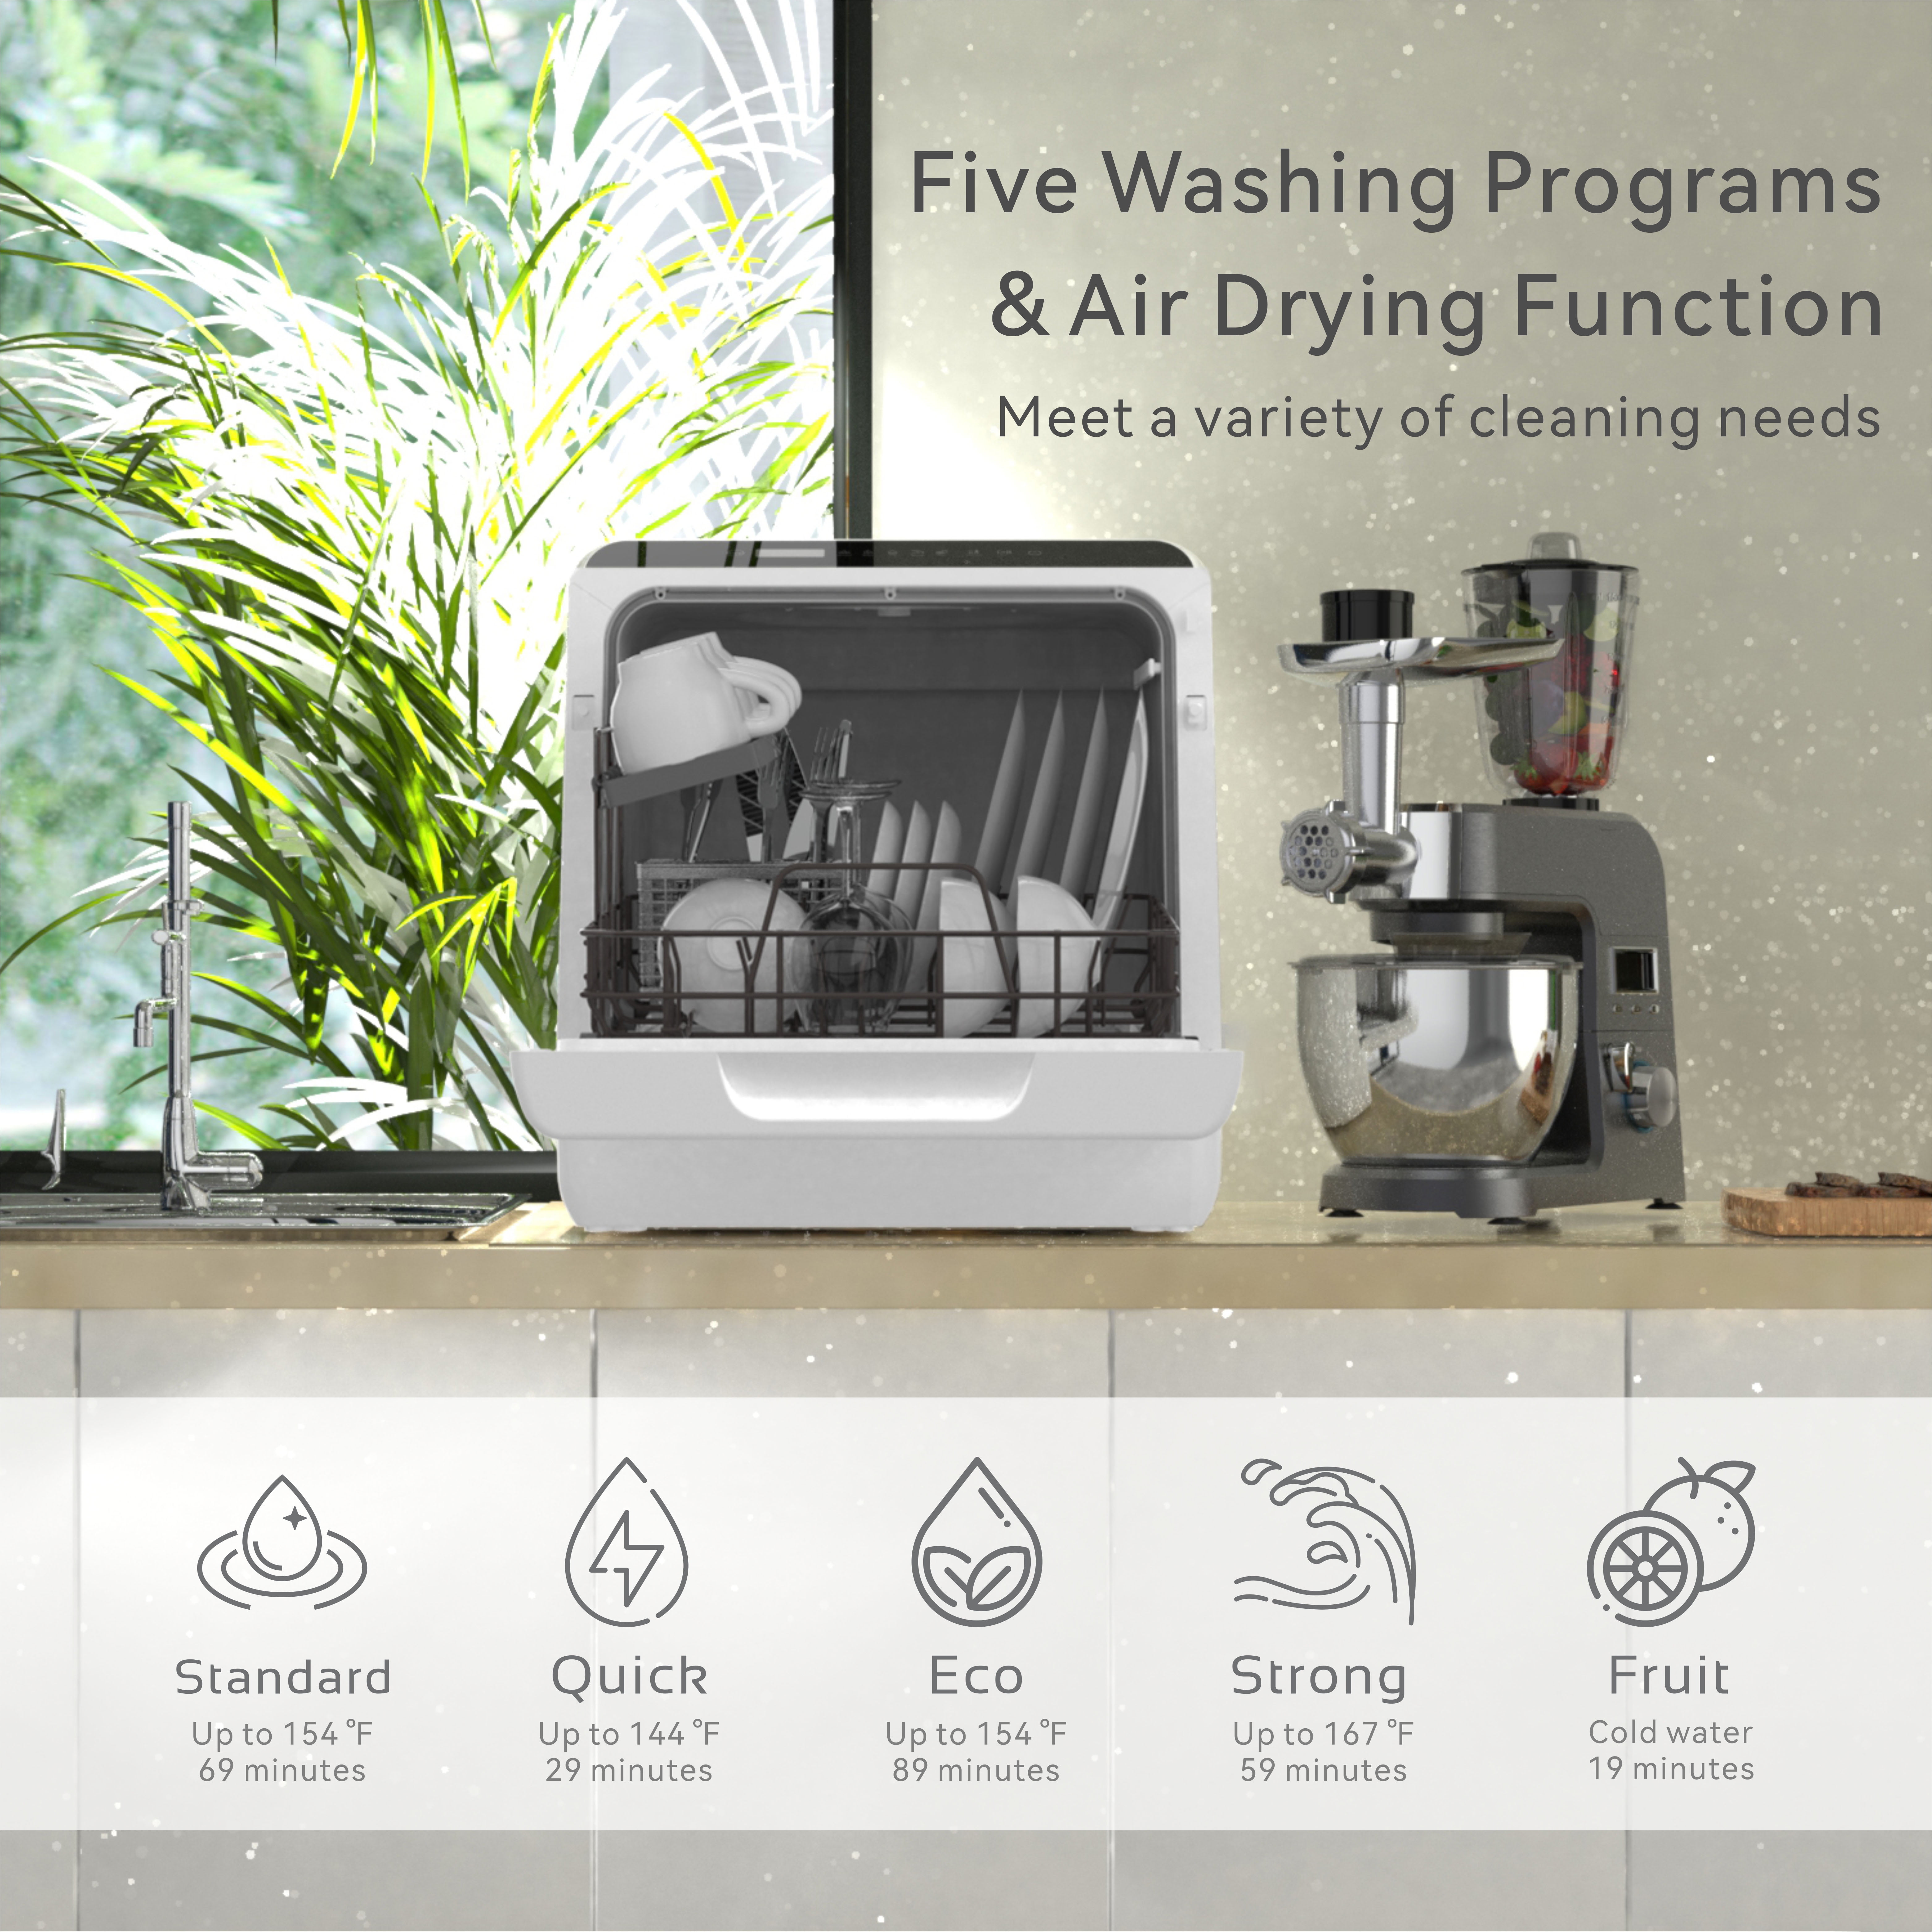 Portable Countertop Dishwasher, 5 Washing Programs Mini Dishwasher with 5L Built-in Water Tank & Inlet Hose, Baby Care & Fruit Wash for Small Apartment, Dorms, RVs -White - 1